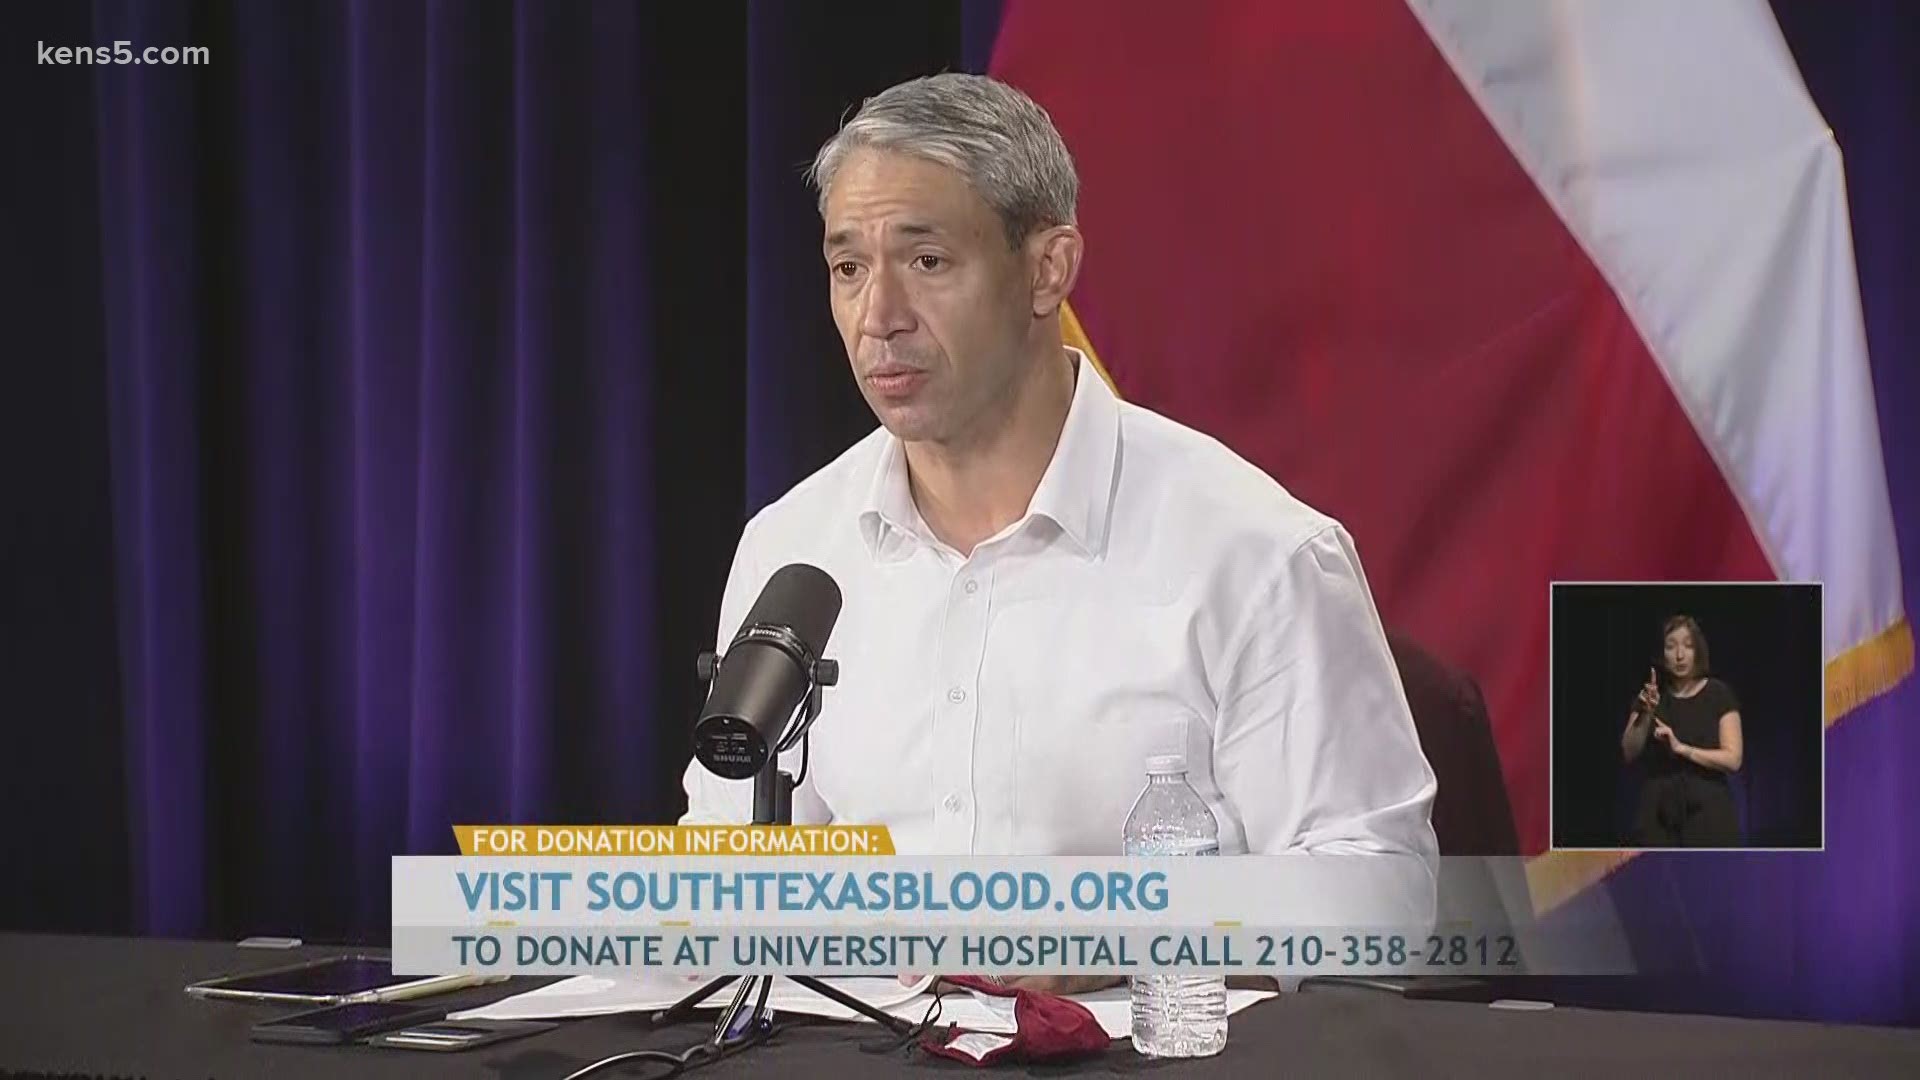 Mayor Nirenberg reported 288 new coronavirus cases, bringing the total in Bexar County to 198,816. No new deaths were reported.